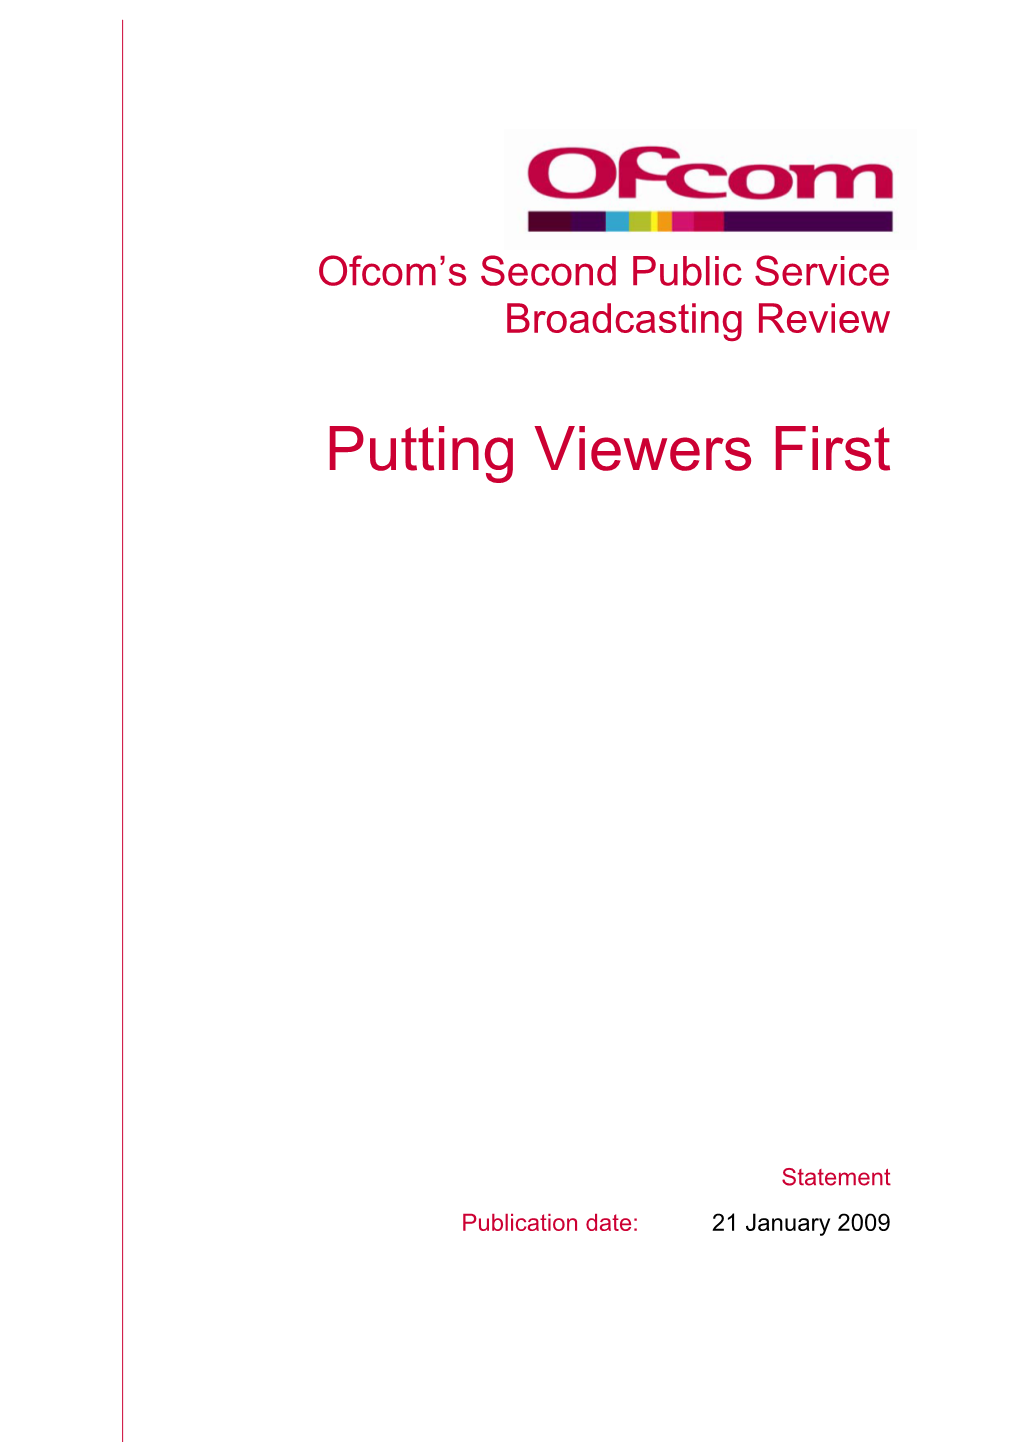 Ofcom's Second Public Service Broadcasting Review : Putting